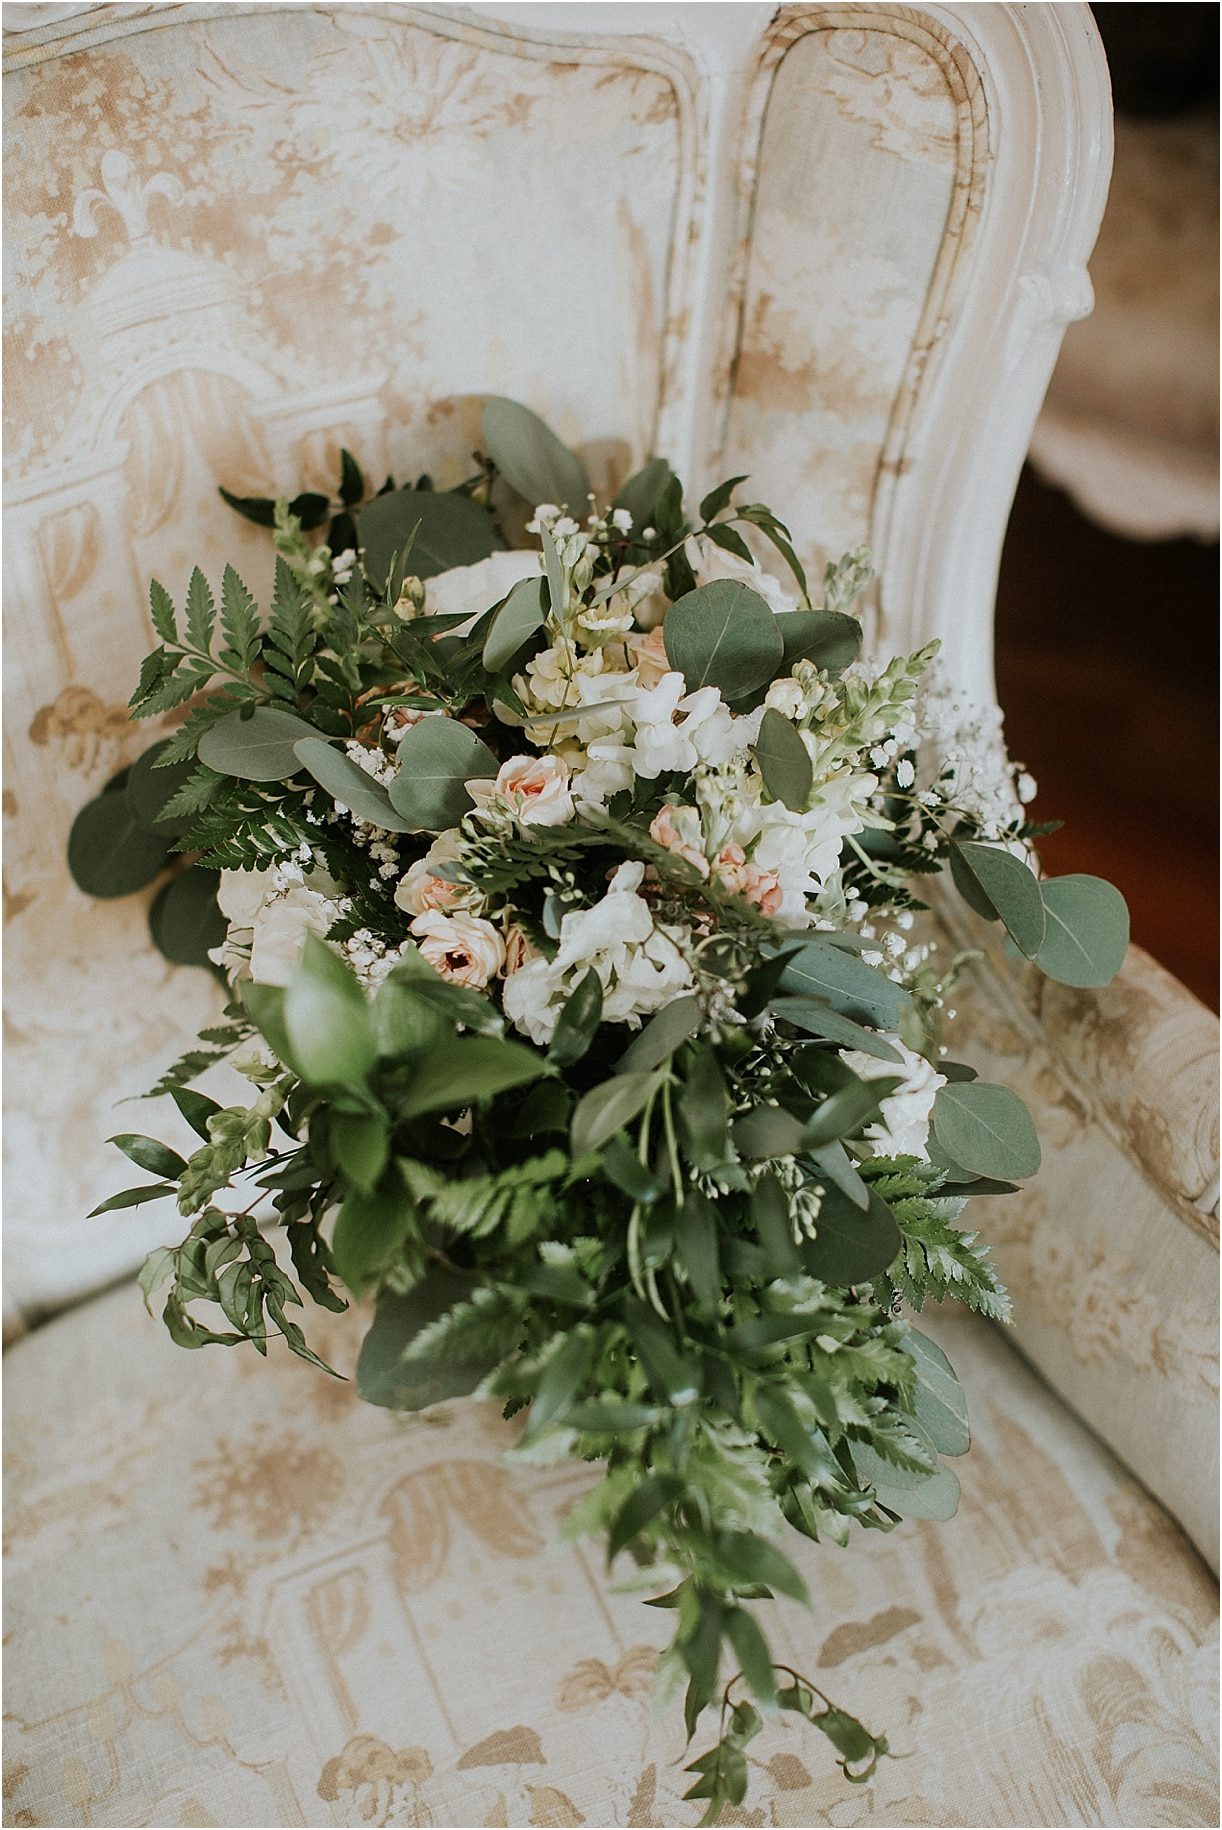 Lovely Virginia Vineyard Wedding as seen on Hill City Bride Blog by Vness Photography - greenery bouquet